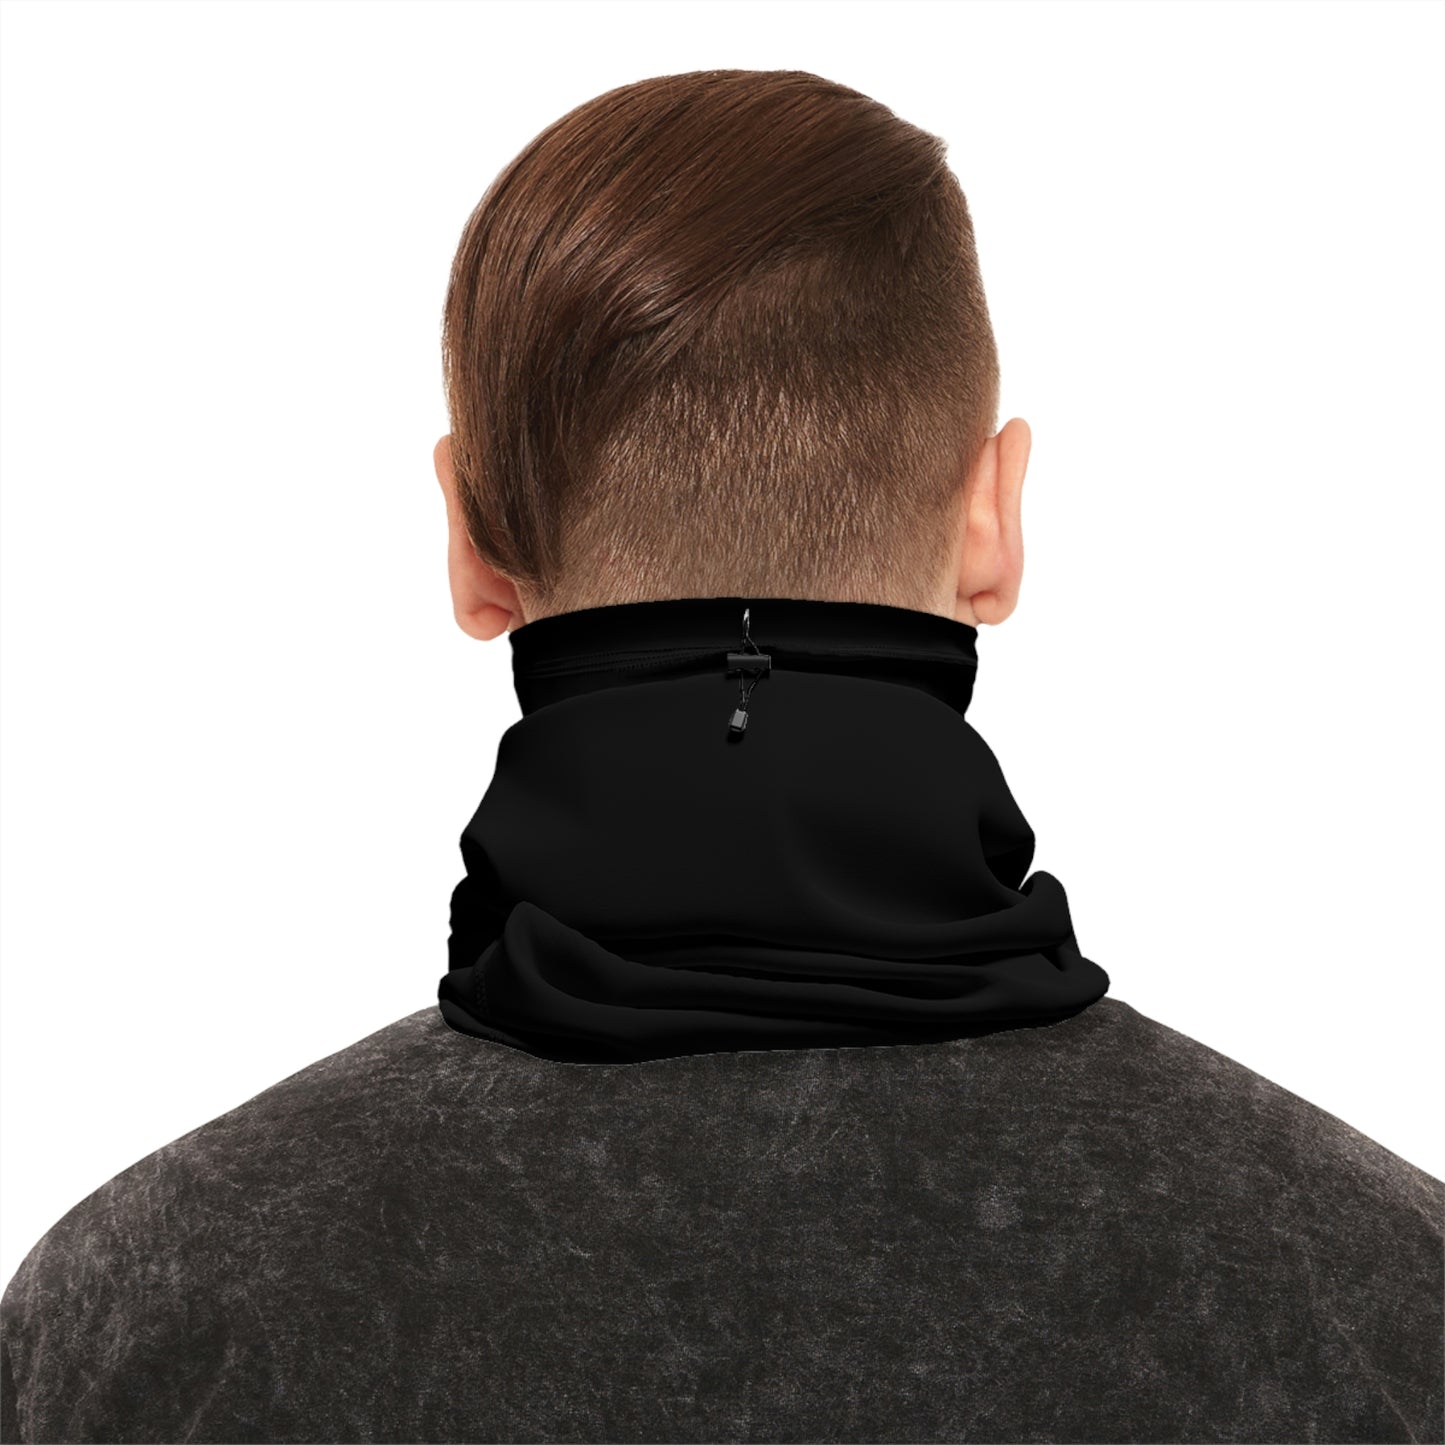 Black Gaiter With Drawstring | CRFC Wolfhounds Blue Crest